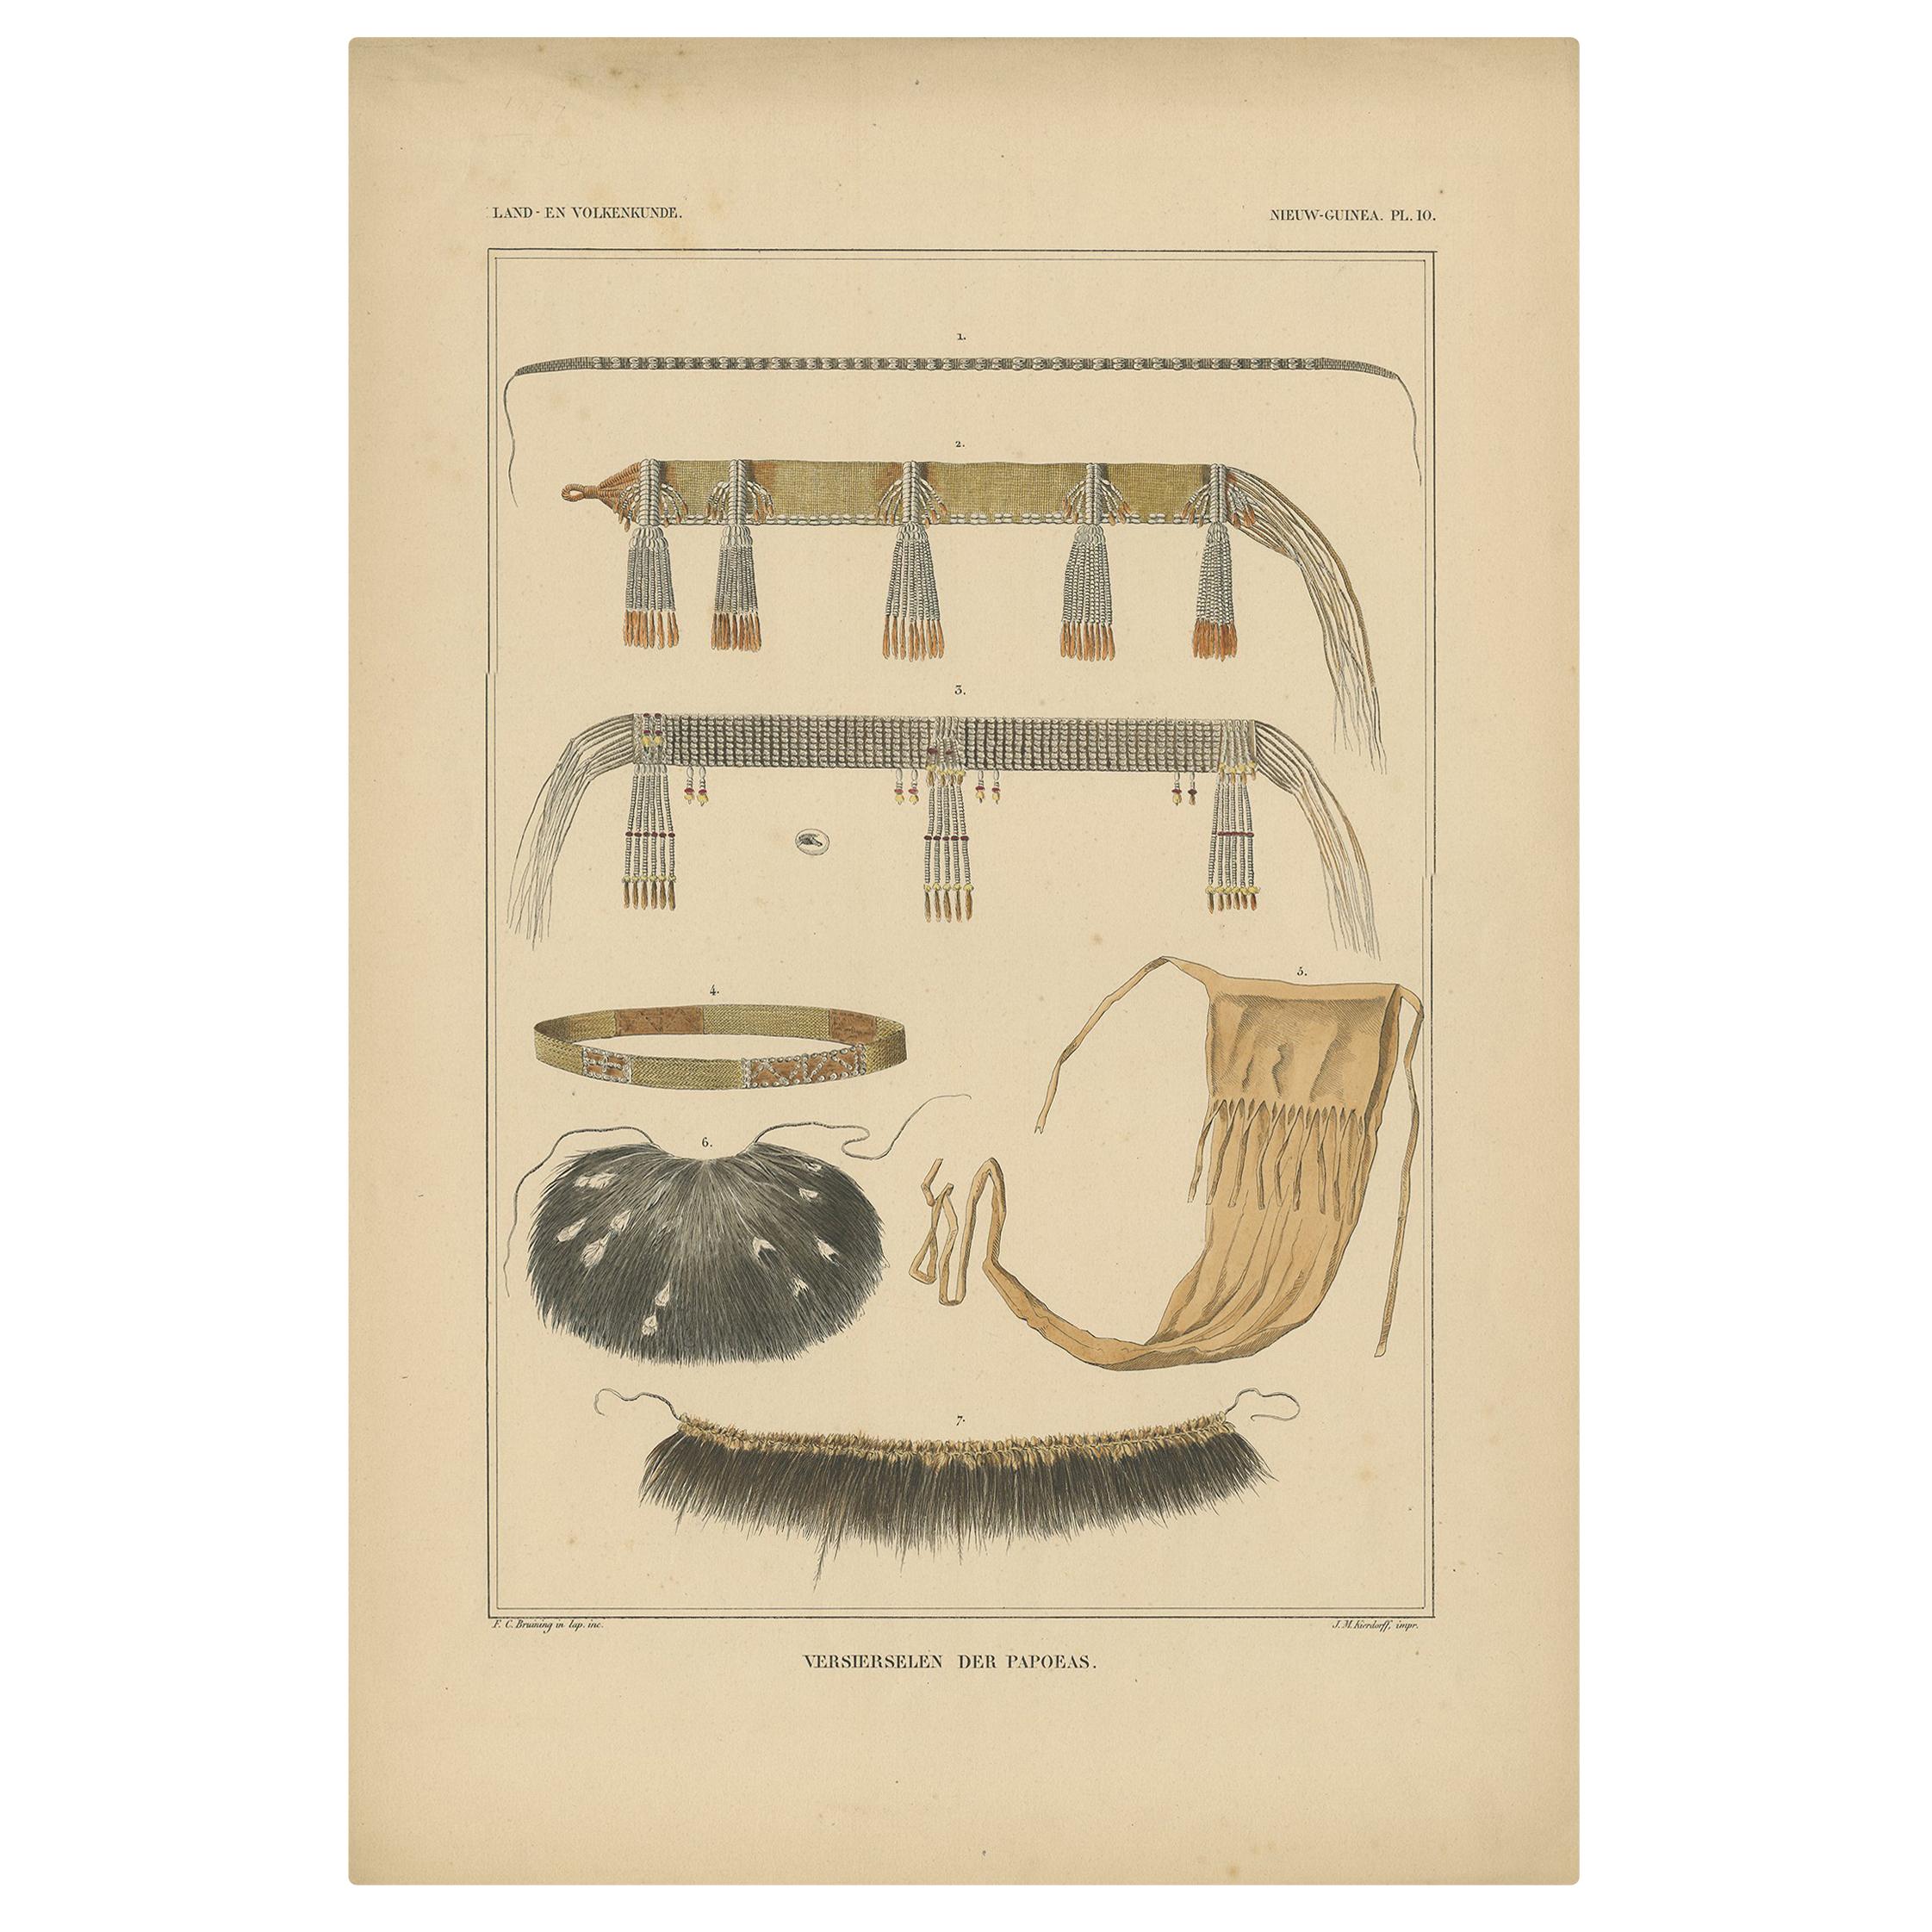 Antique Print with Decorations 'New Guinea, Indonesia' by Temminck, circa 1840